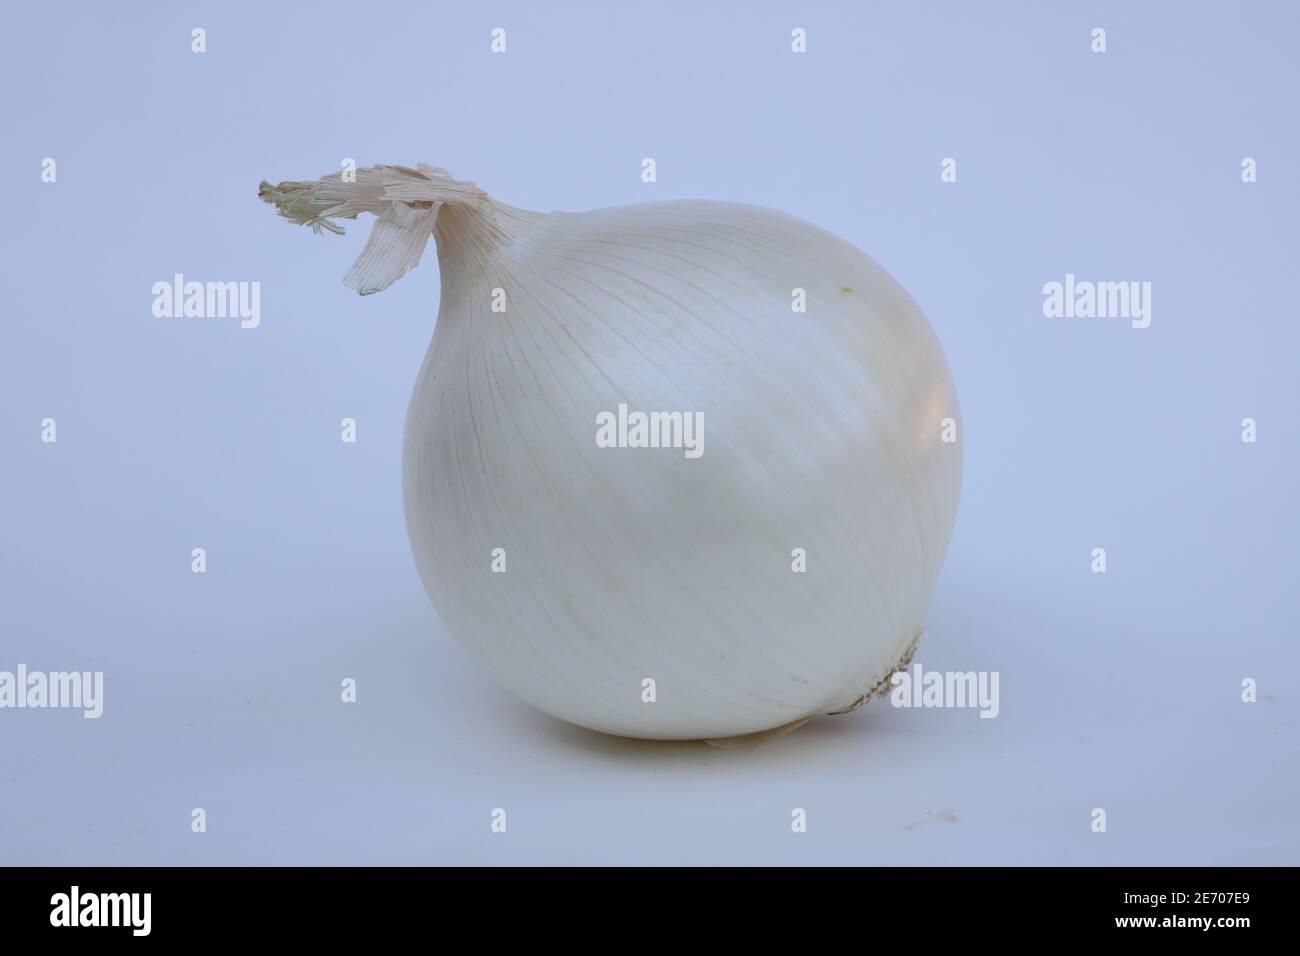 Close up of a beautiful white onion against a white background Stock Photo